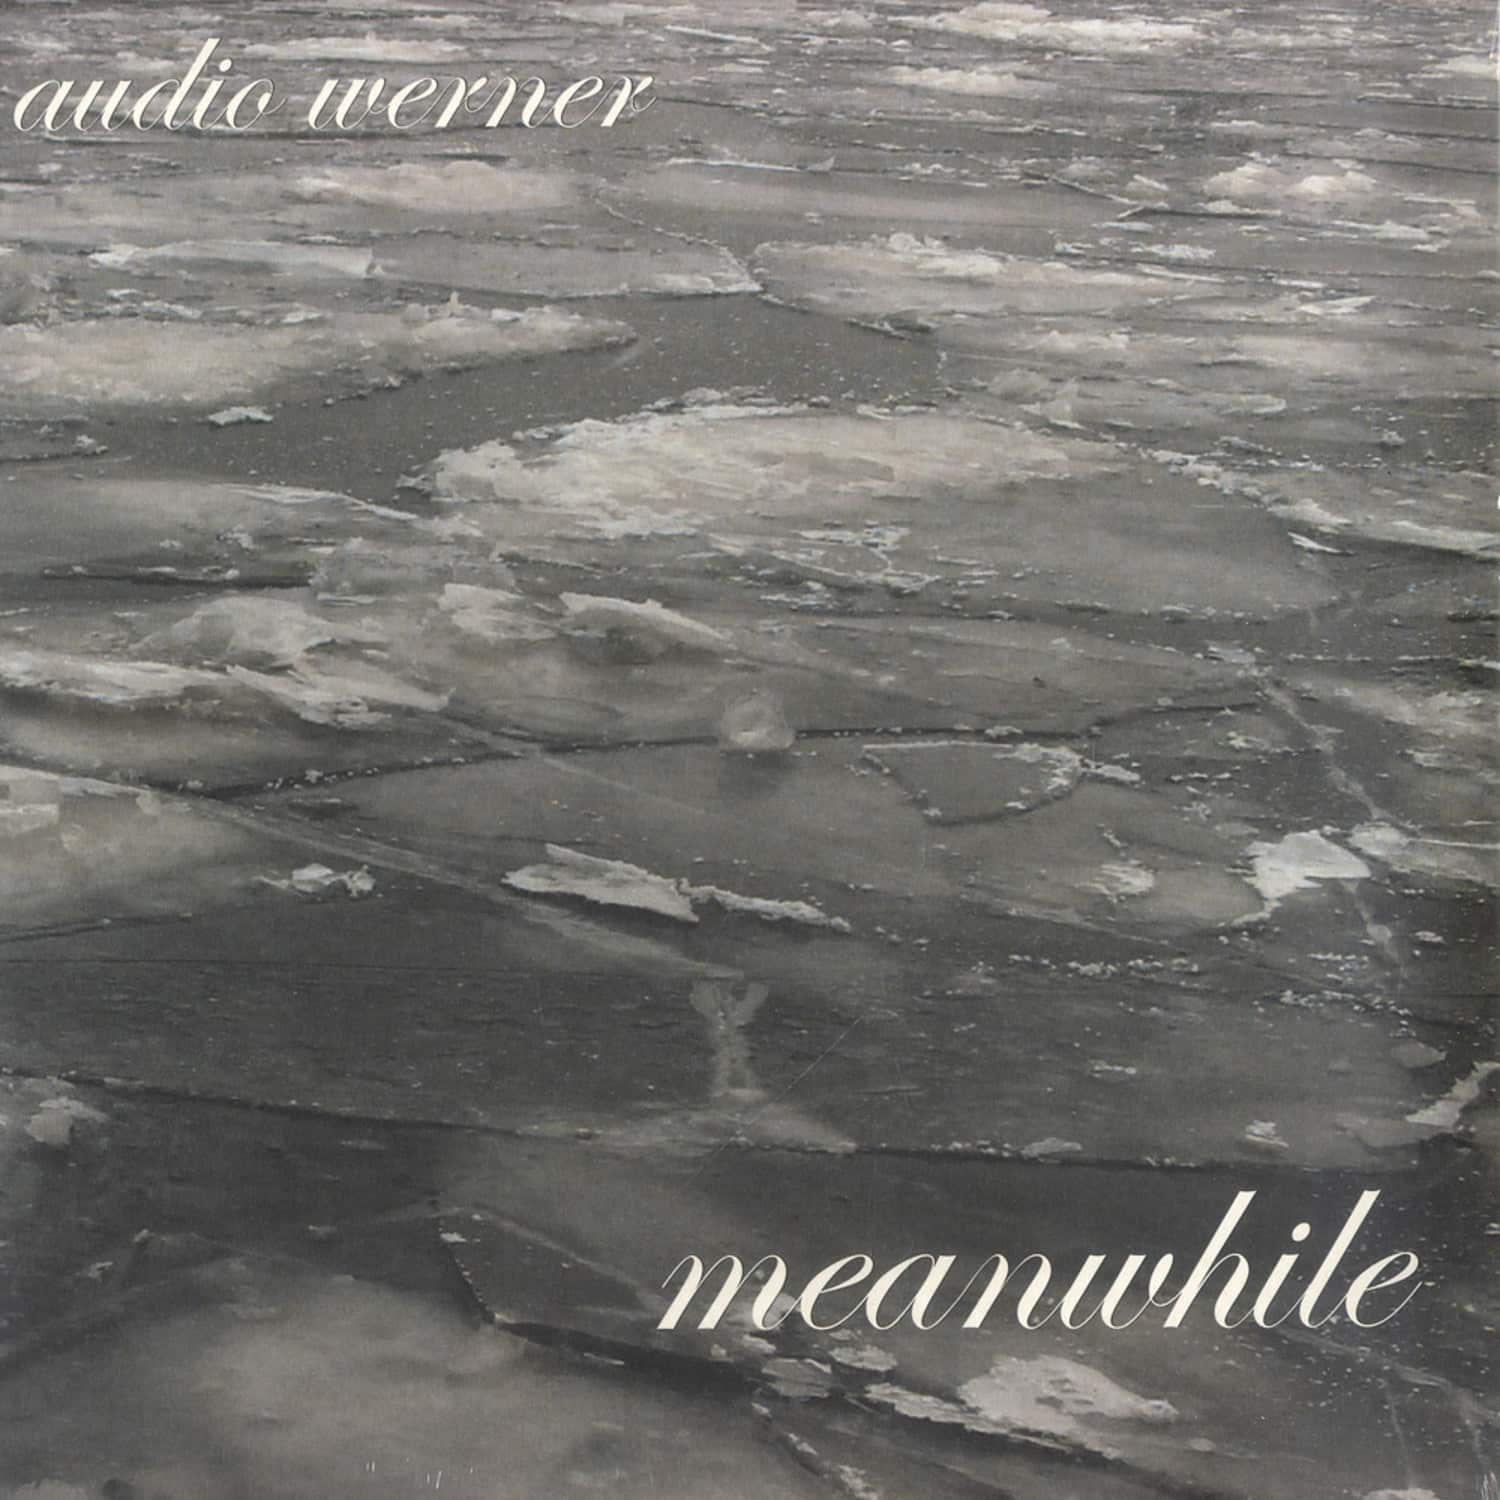 Audio Werner - MEANWHILE 